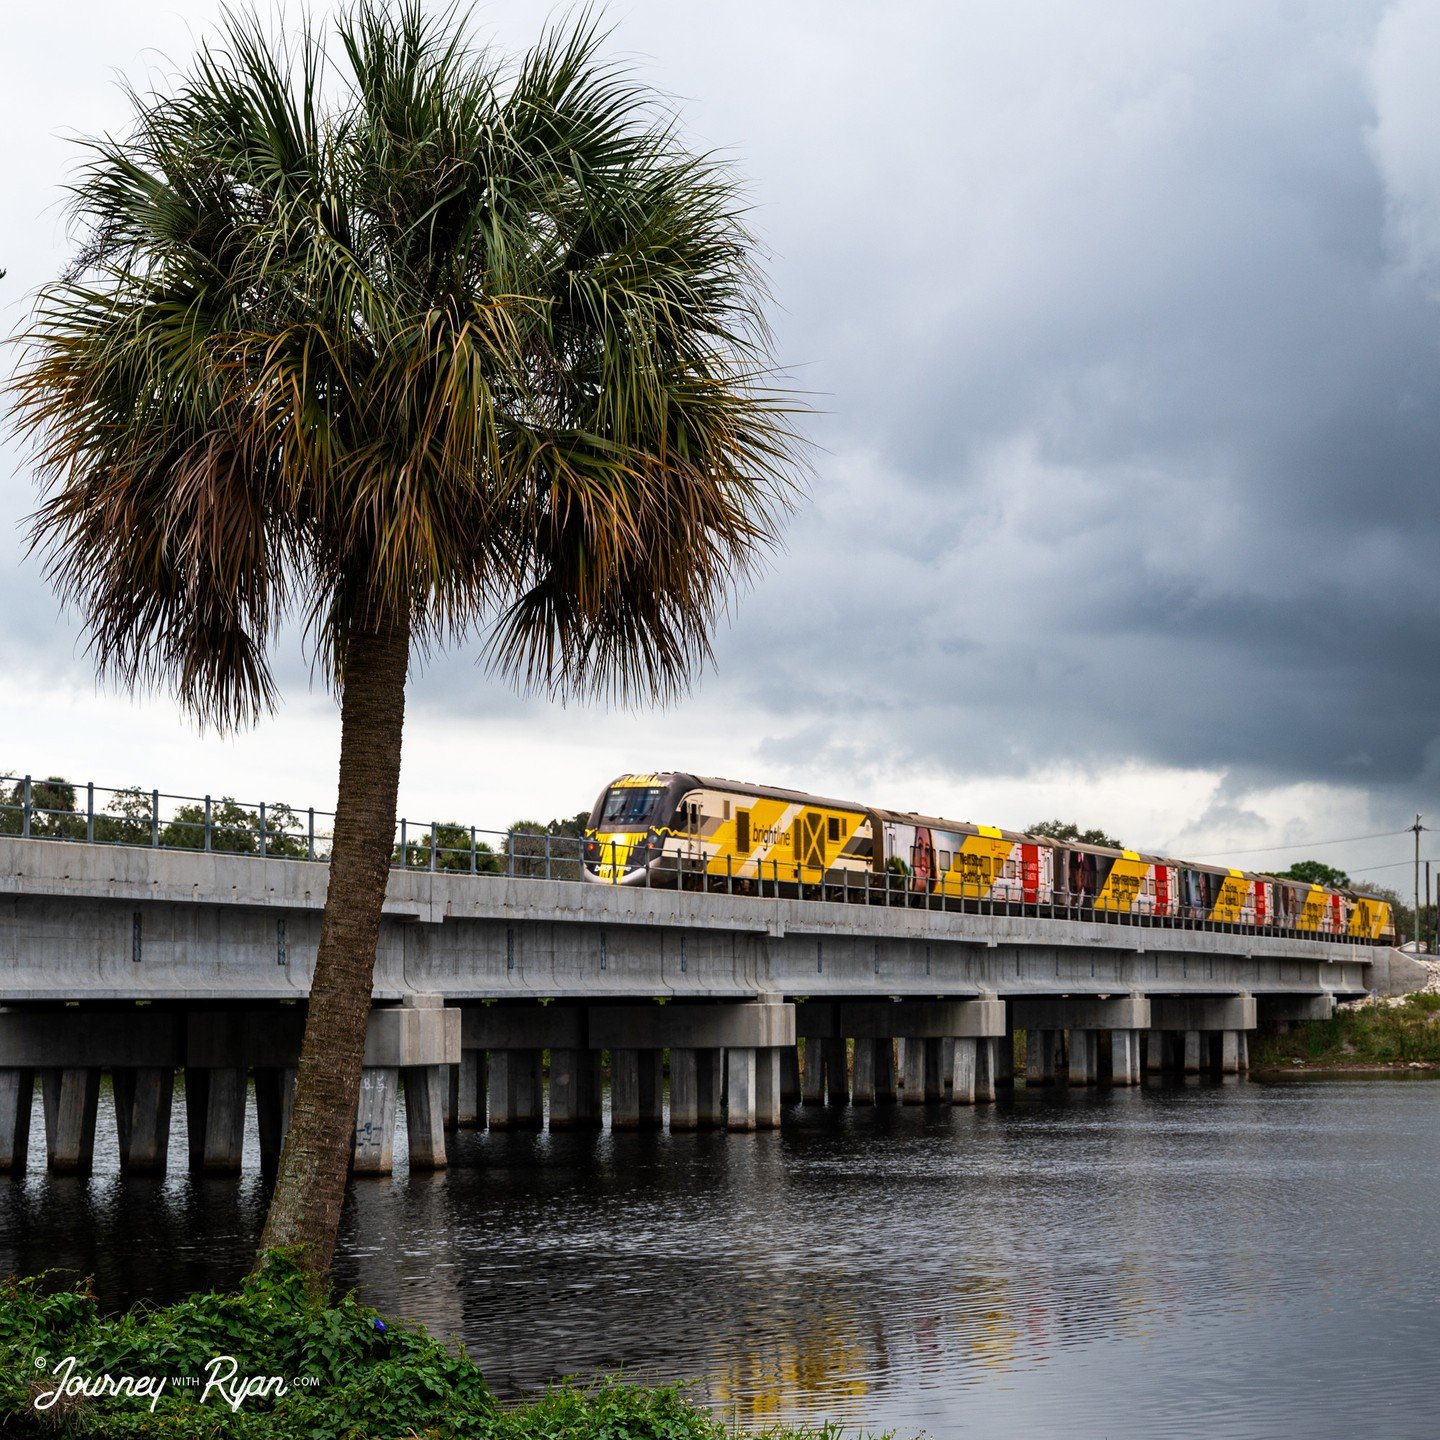 Brightline 🚆
.
Welcome high speed rail to the US! This was my first time seeing it up close in action and I can't wait to use it 😍 I hope I don't end up on @brightlinecrashtracker...
.
📸: #nikonz6ii
.
Shot at: @gobrightline
.
#journeywithryan #bri